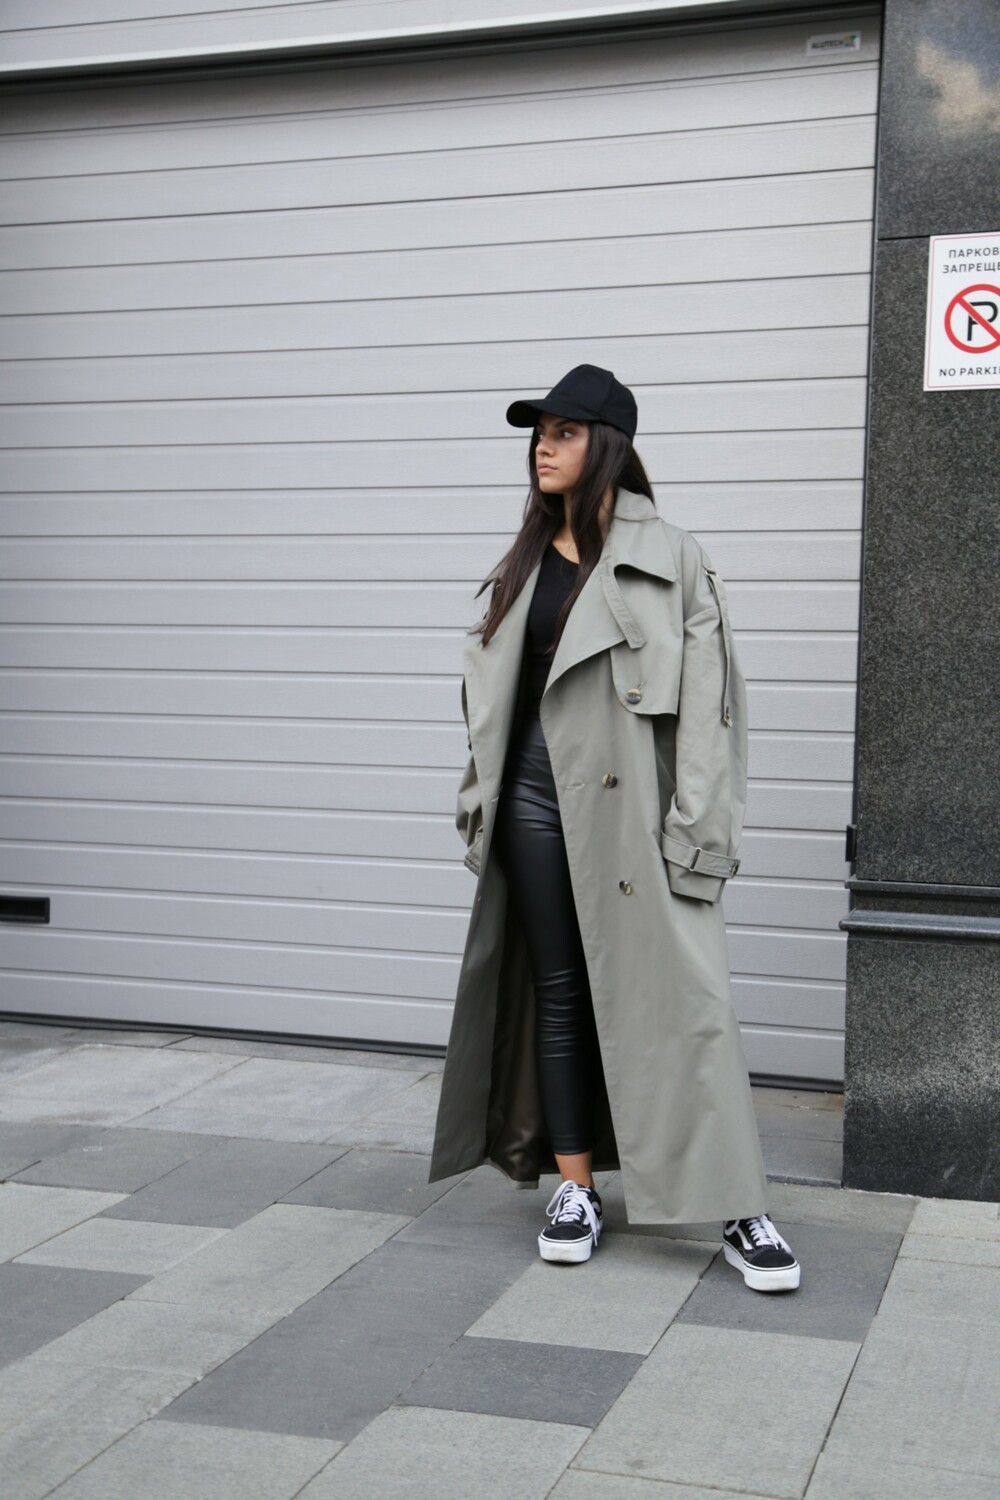 Trench coat in olive color